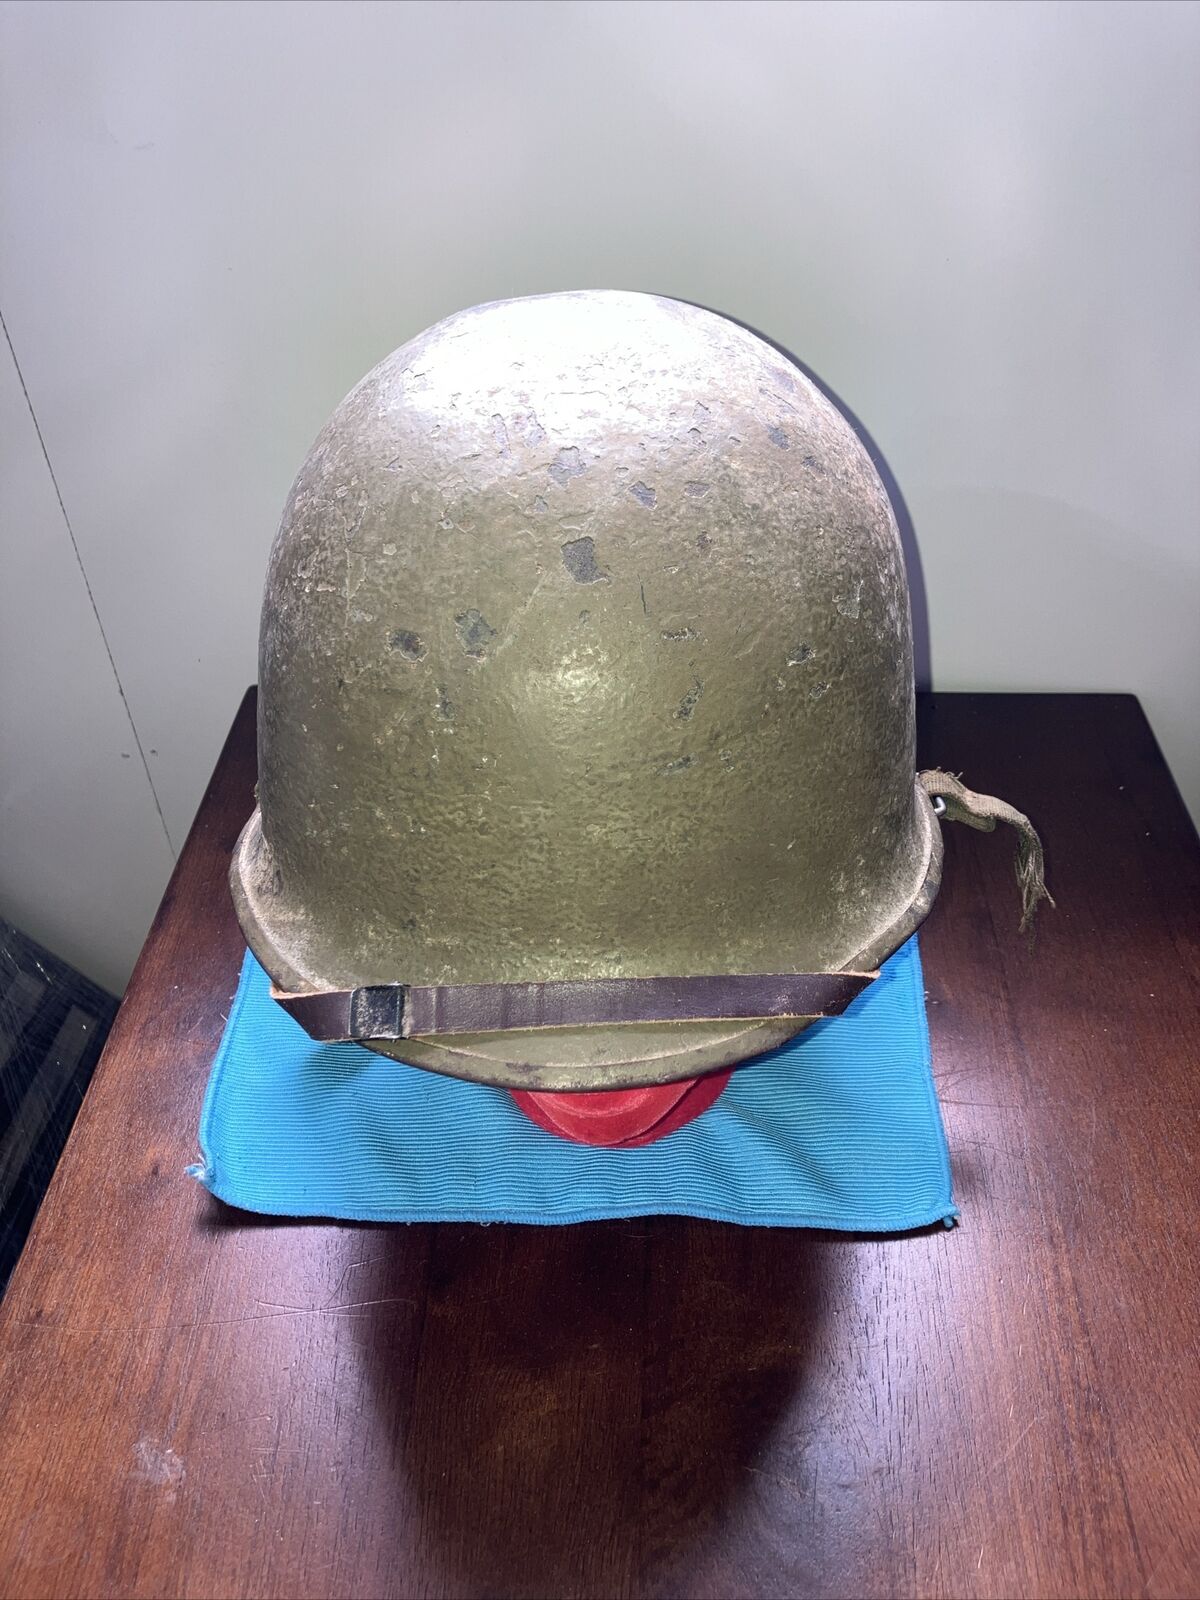 Original US Ml Helmet Military Rear Seam Swivel Bale With Liner See All Pictures